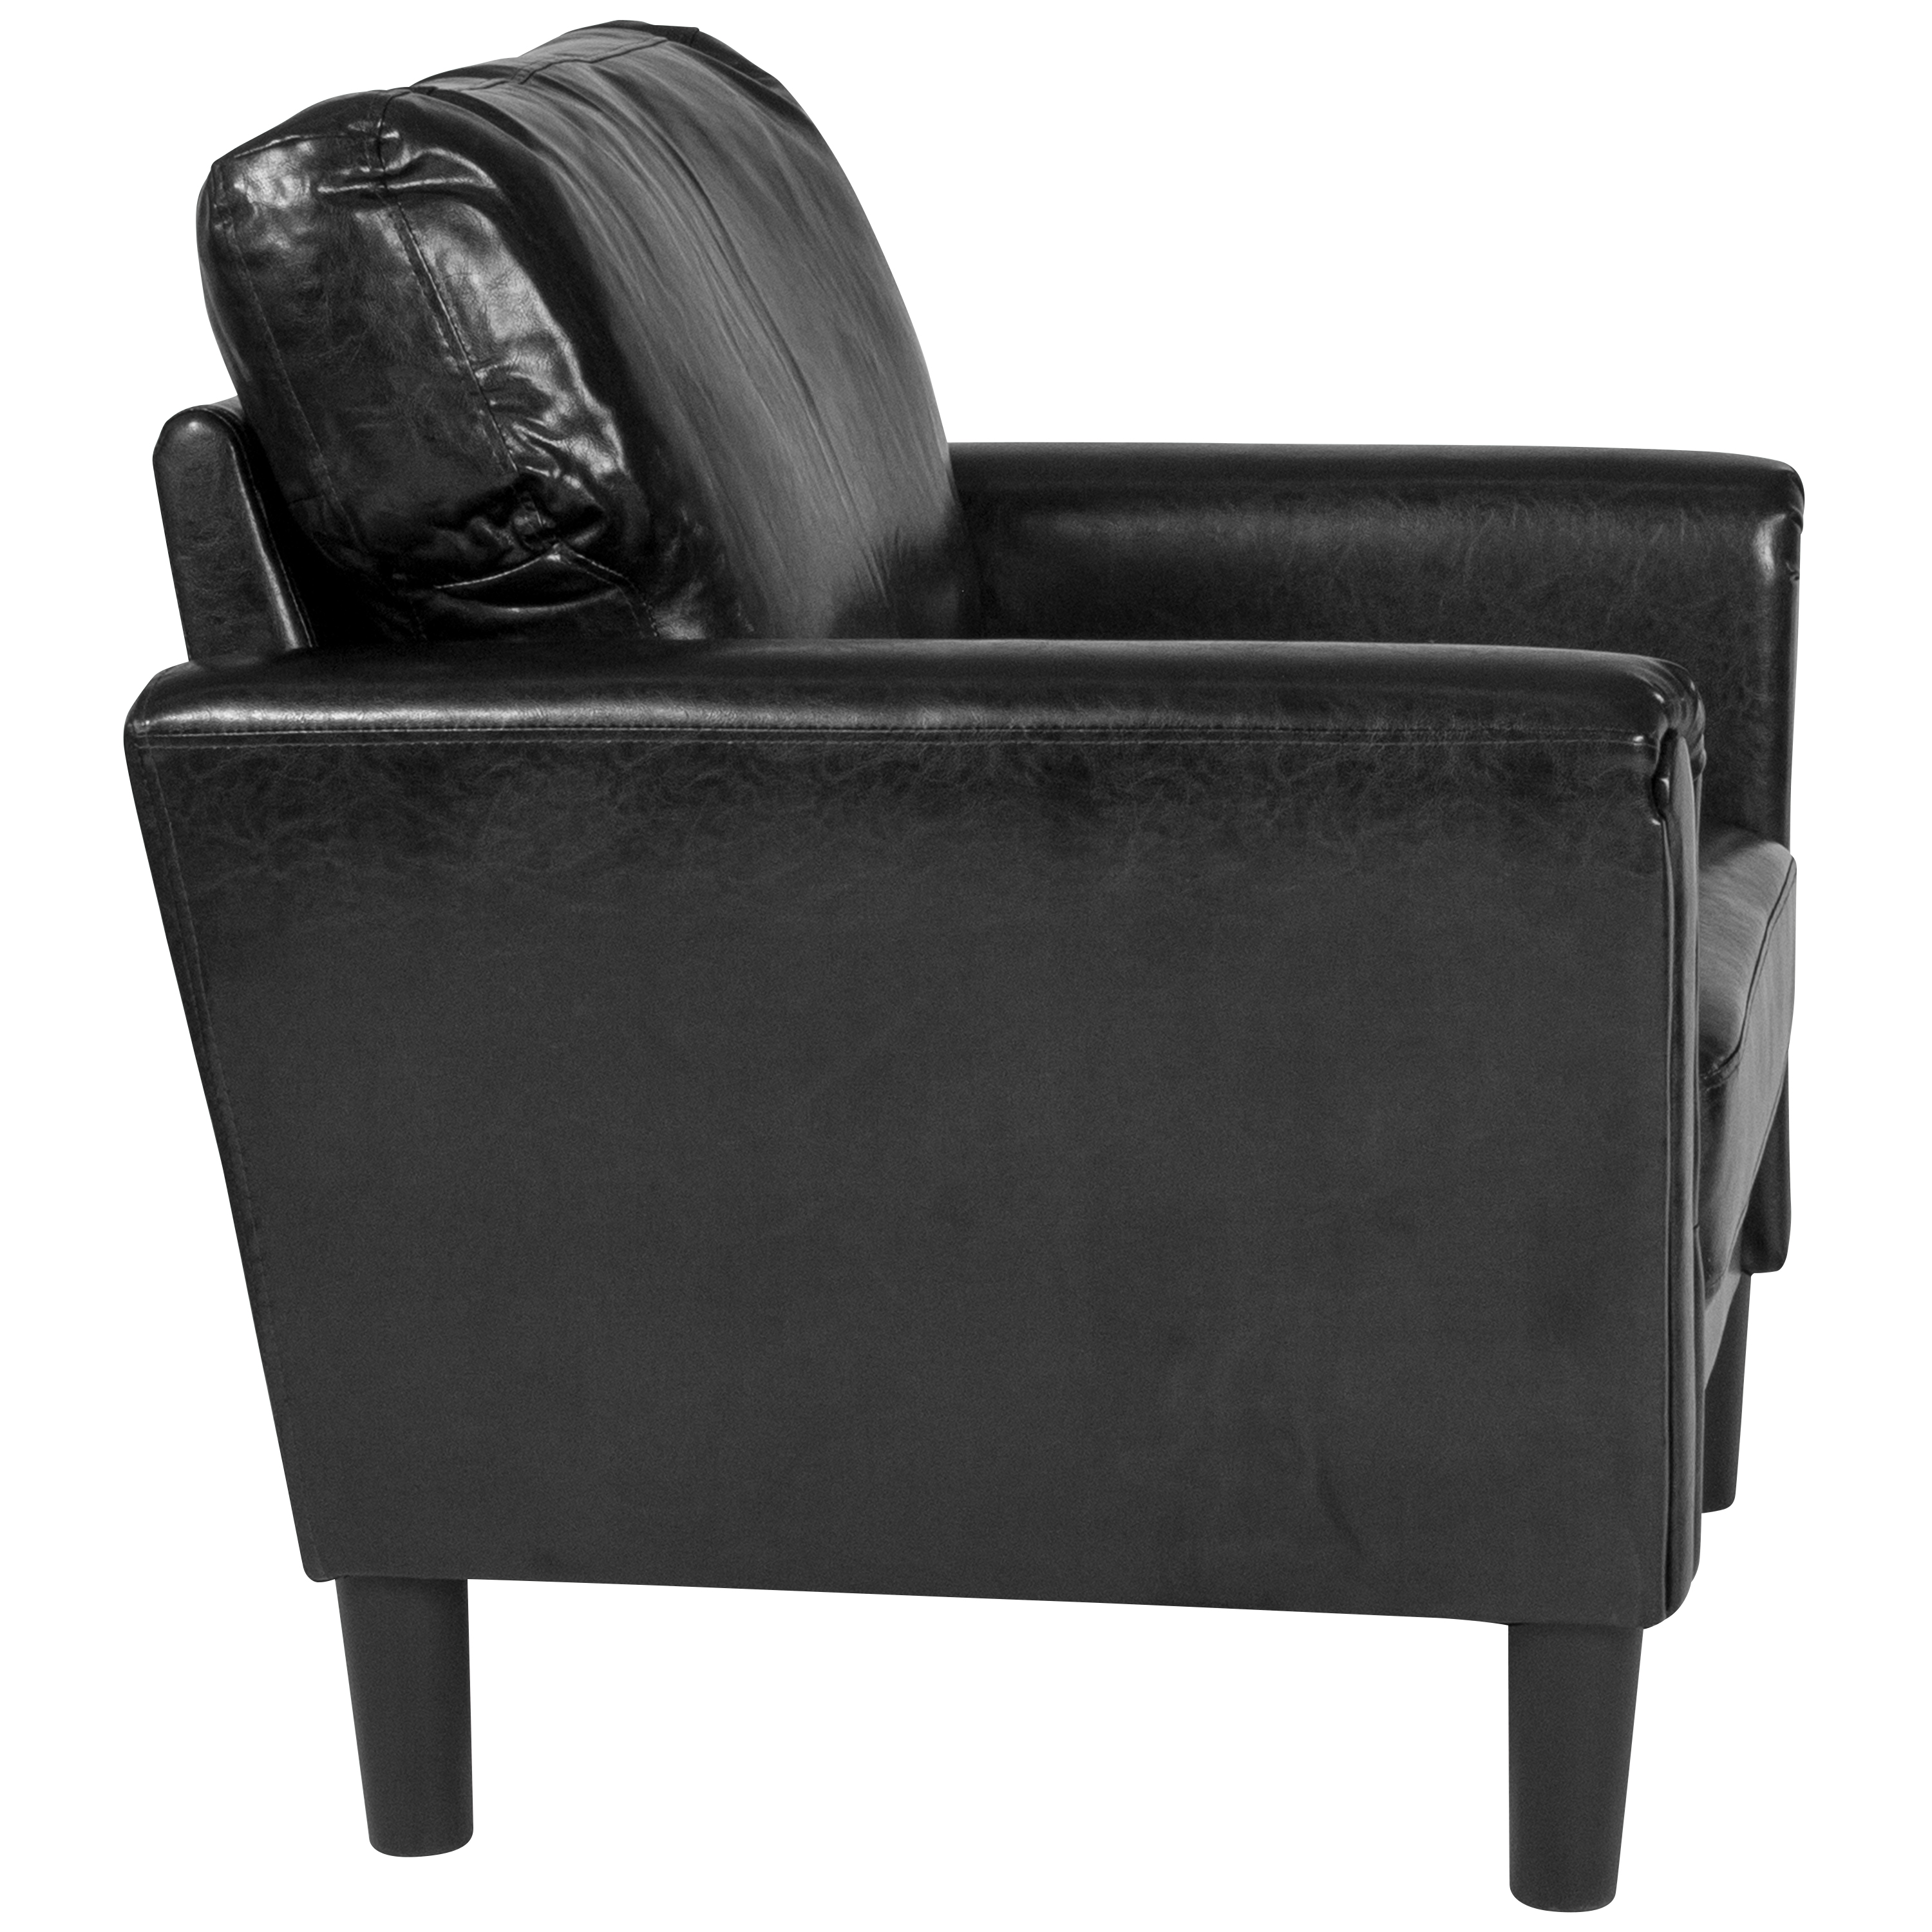 Flash Furniture Bari Upholstered Chair in Black LeatherSoft - image 4 of 5